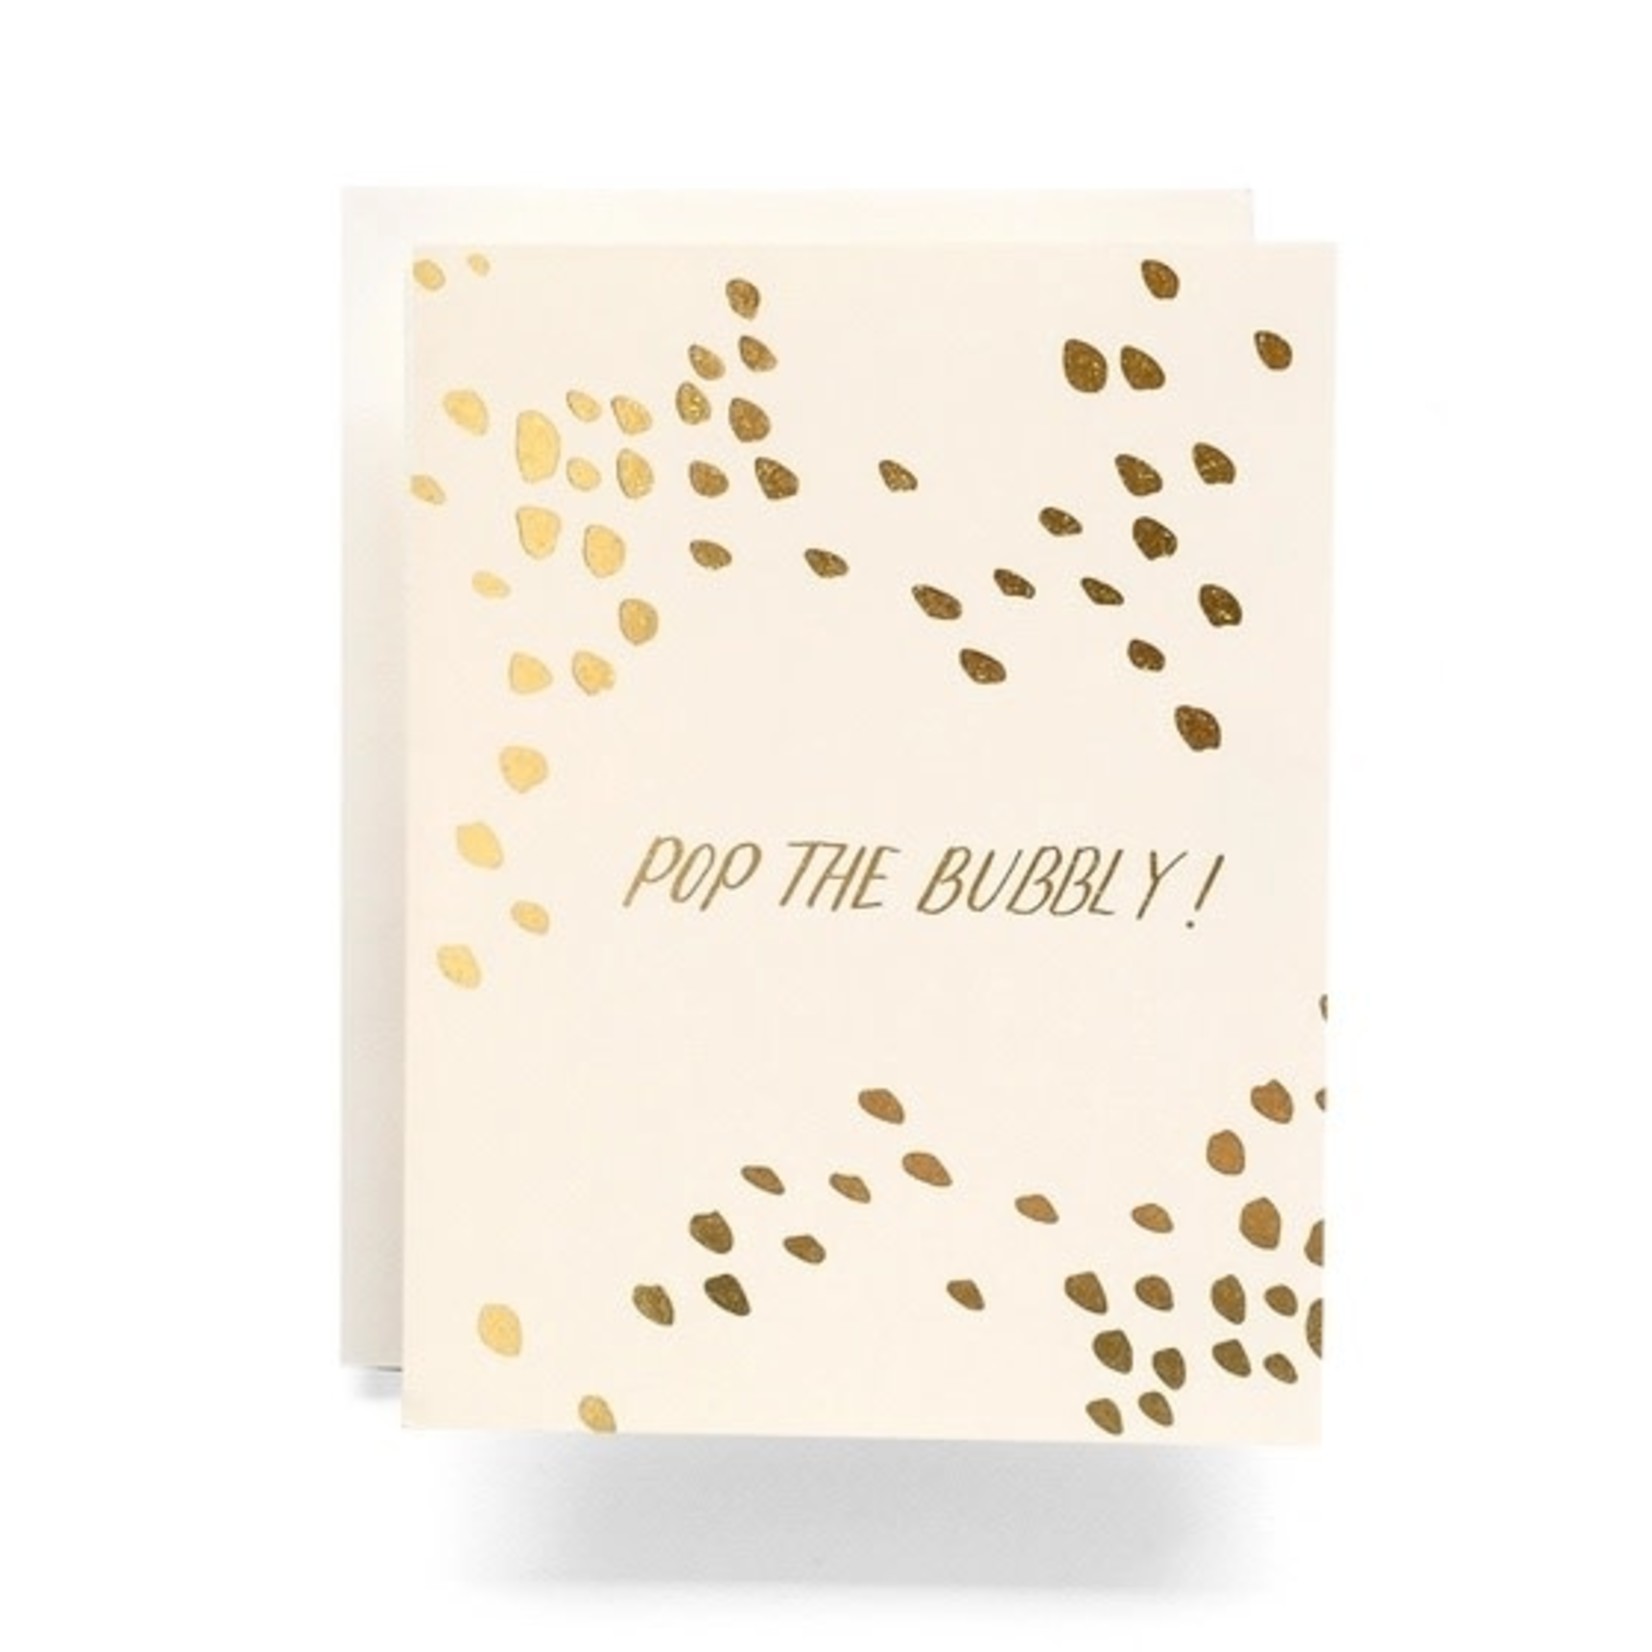 Pop the Bubbly! - Greeting Card